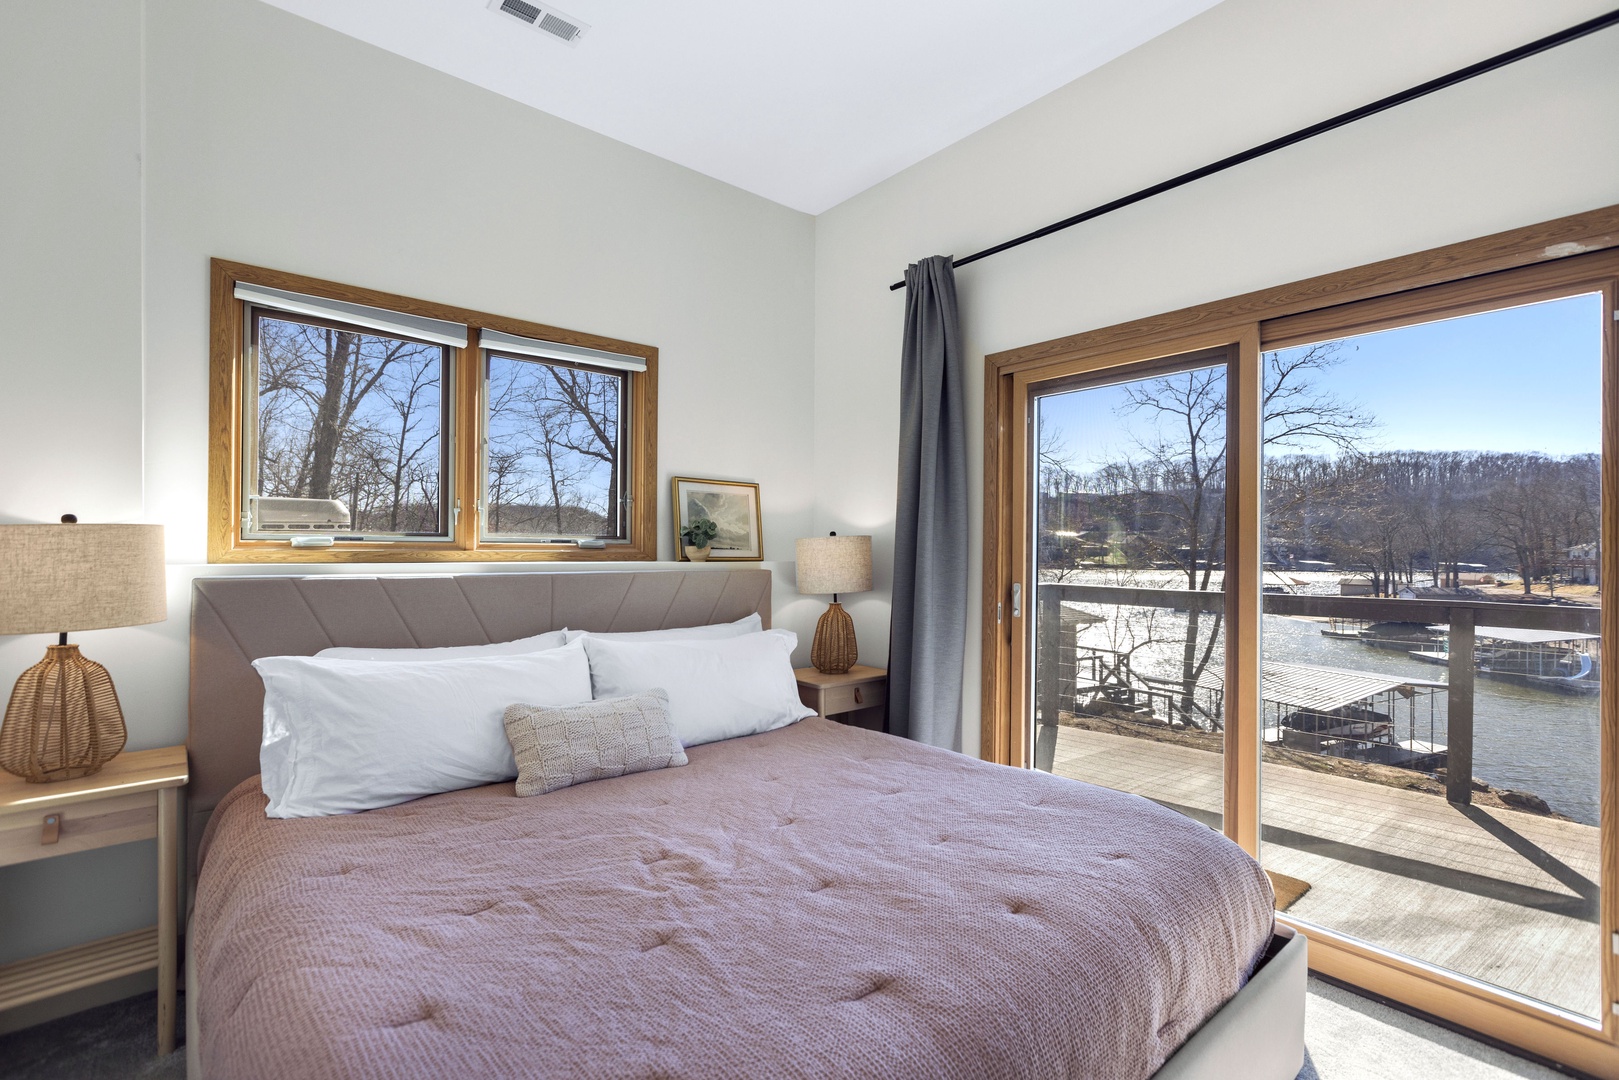 The final bedroom offers a plush king bed & deck access